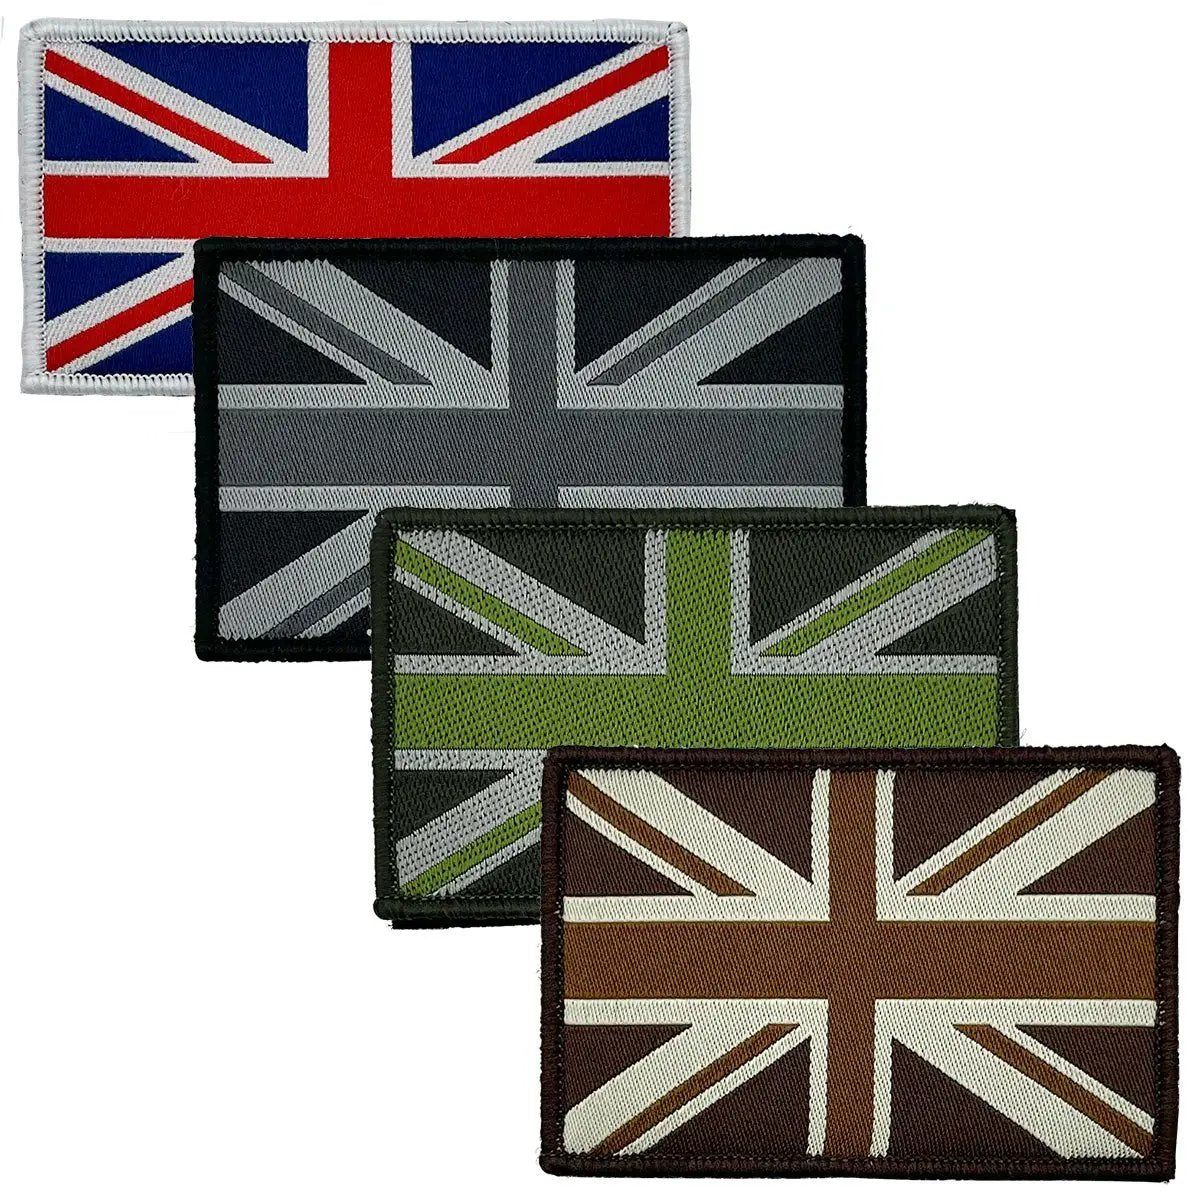 Union Jack Patch with Hook and Loop Backing - John Bull Clothing